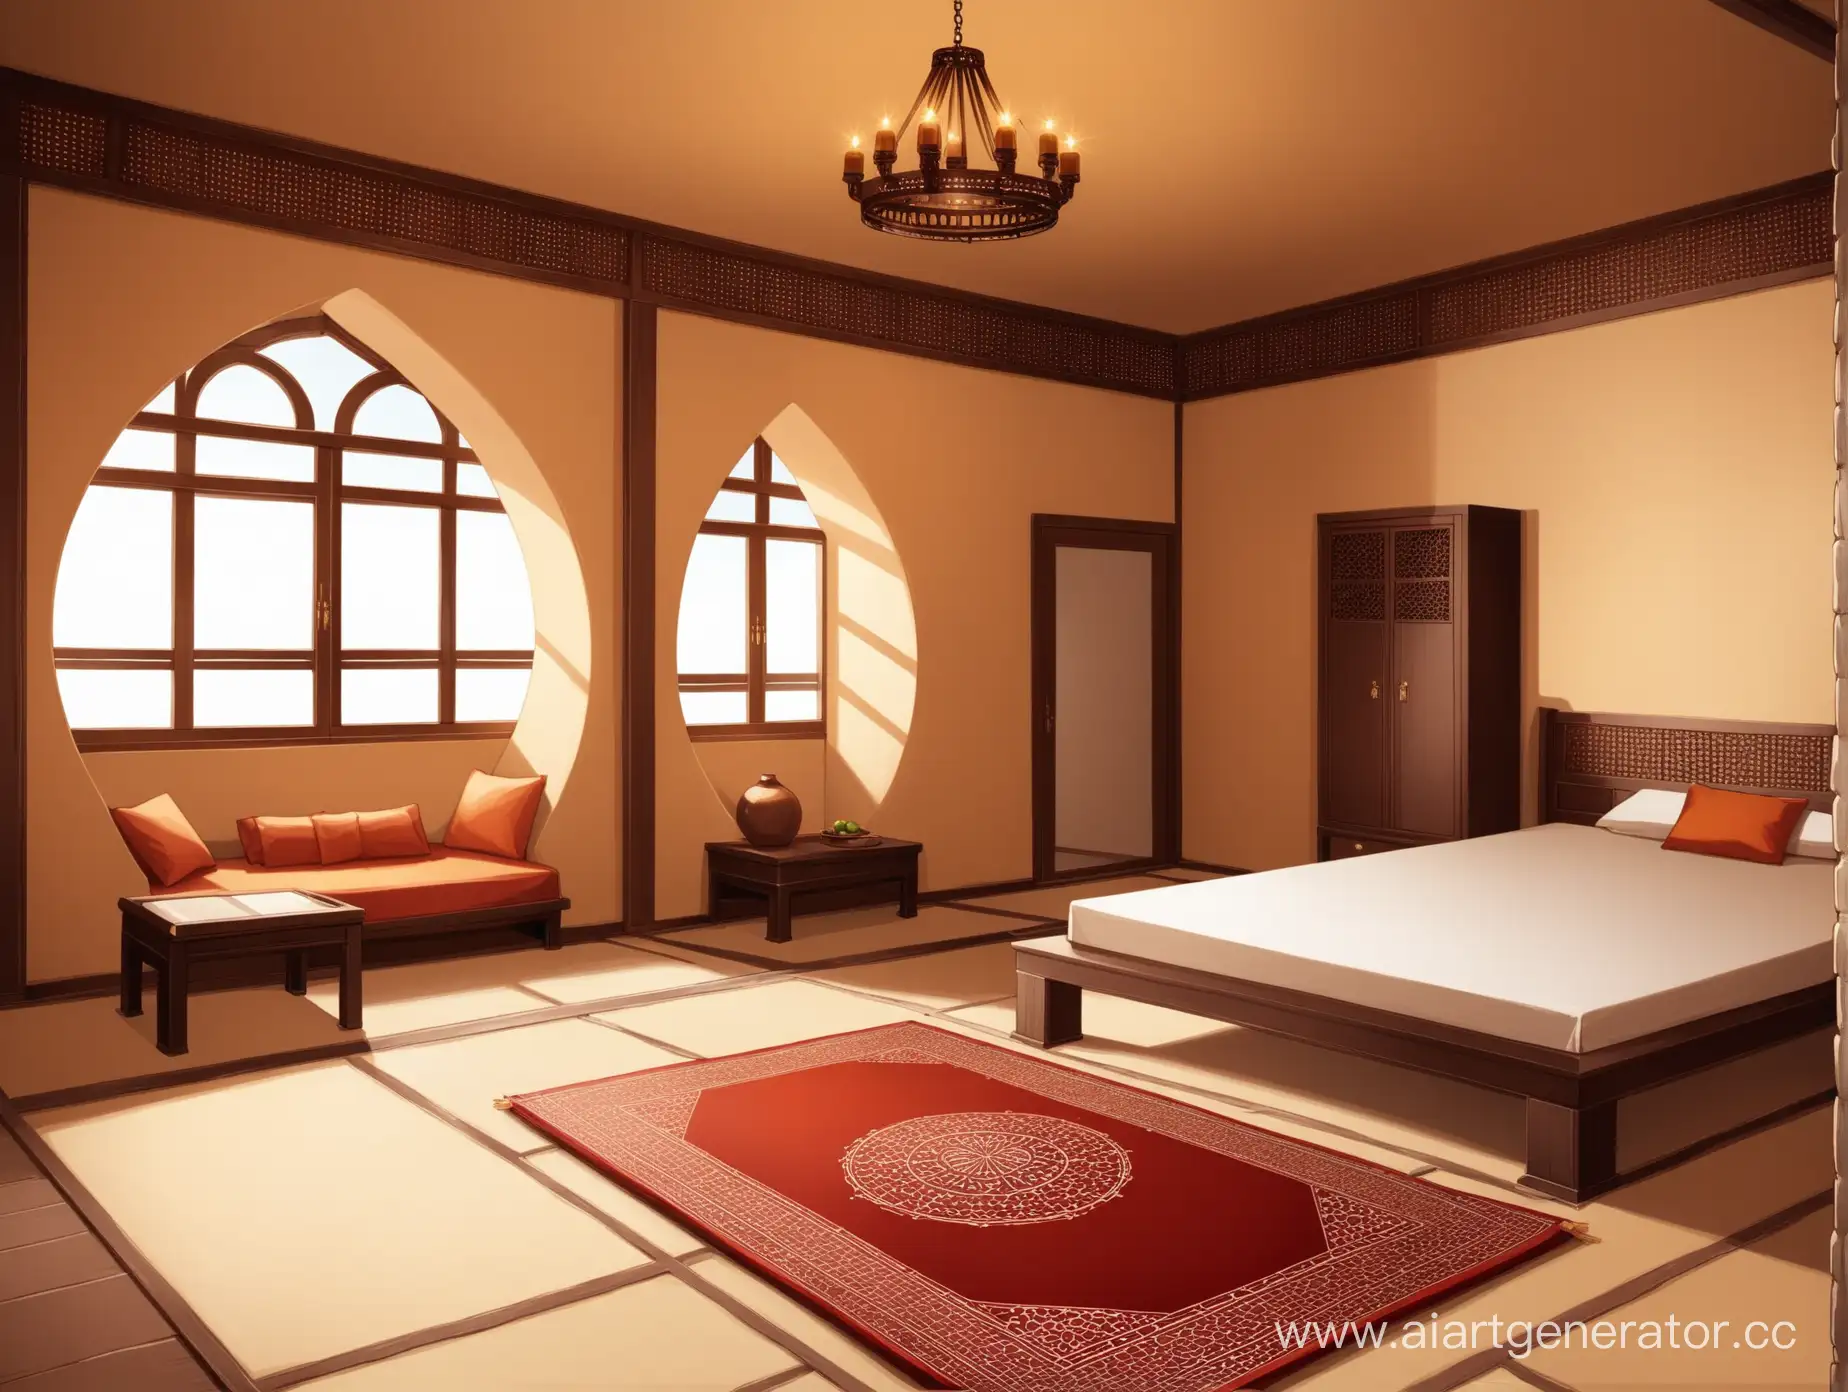 Eastern-Style-Room-with-Intricate-Decor-and-Soft-Lighting